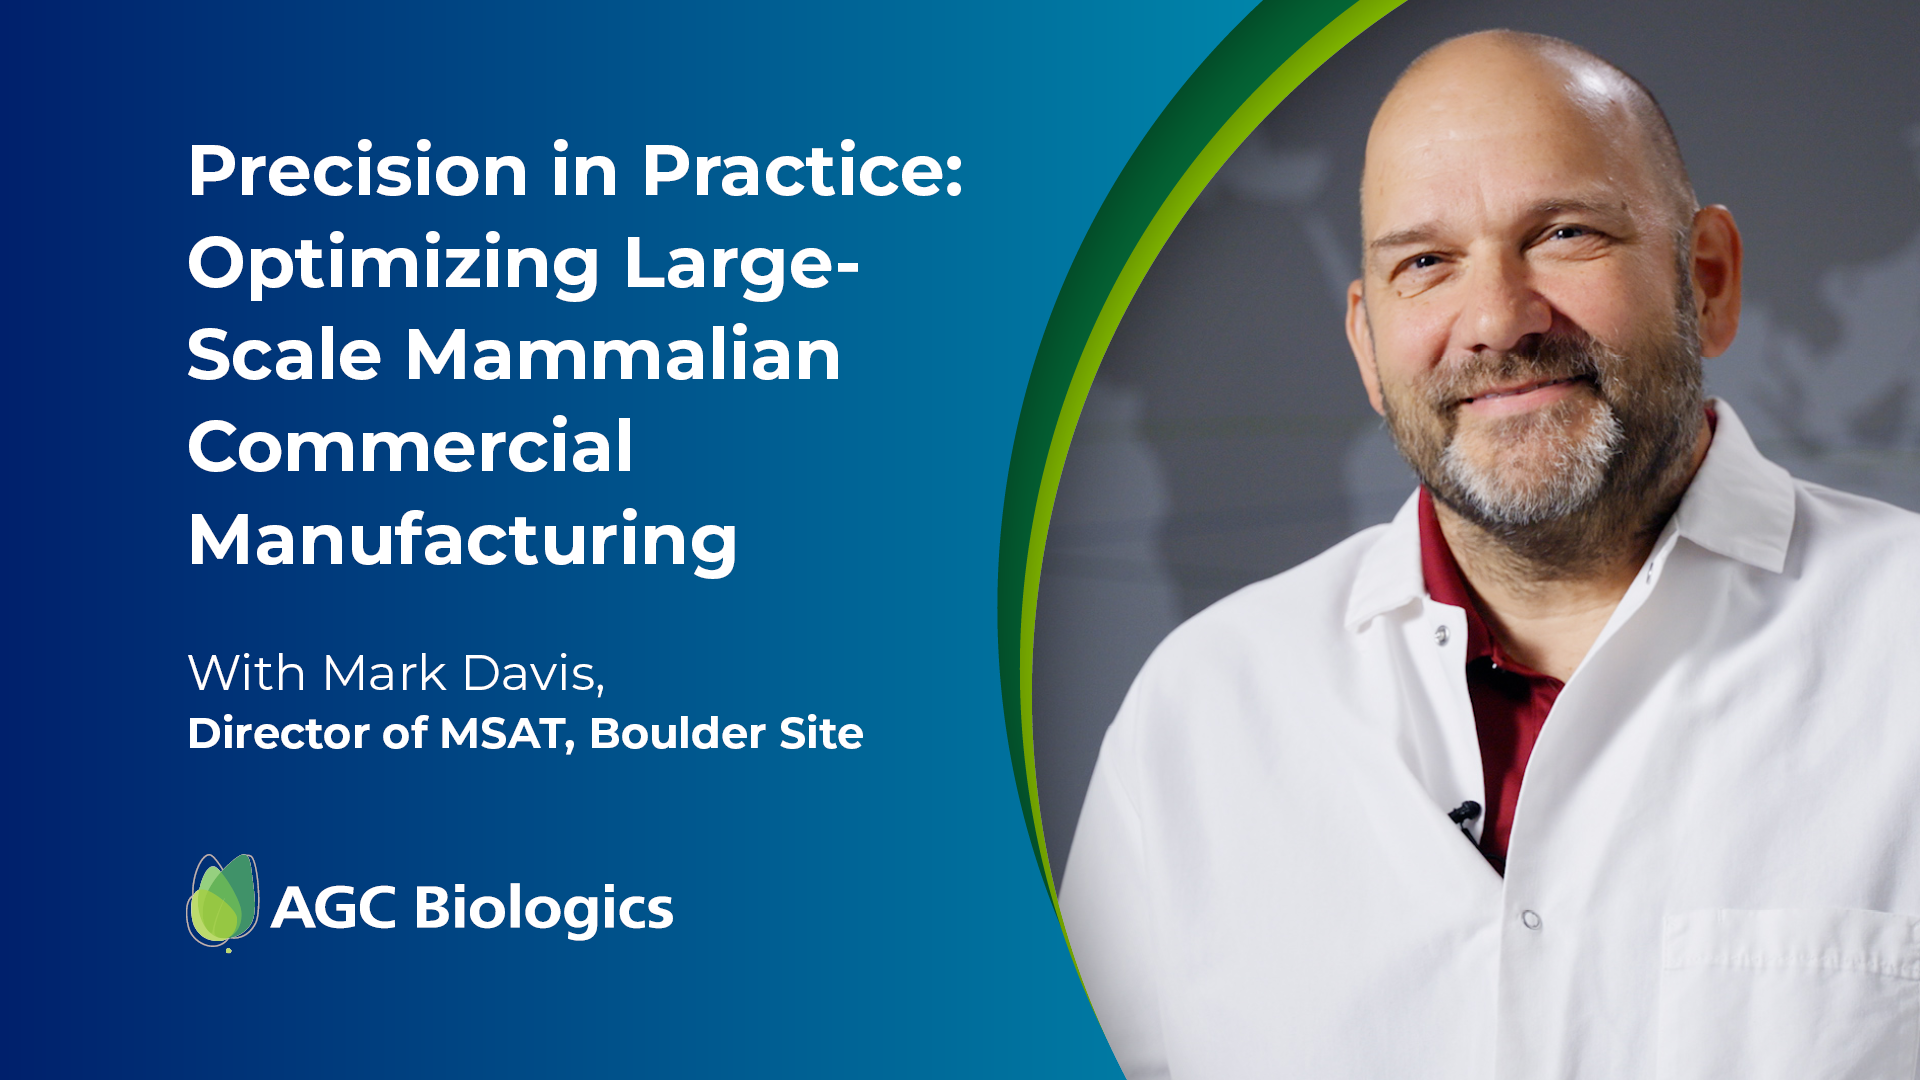 Video: How to Adapt Mammalian Manufacturing Strategies for Evolving Regulatory Expectations